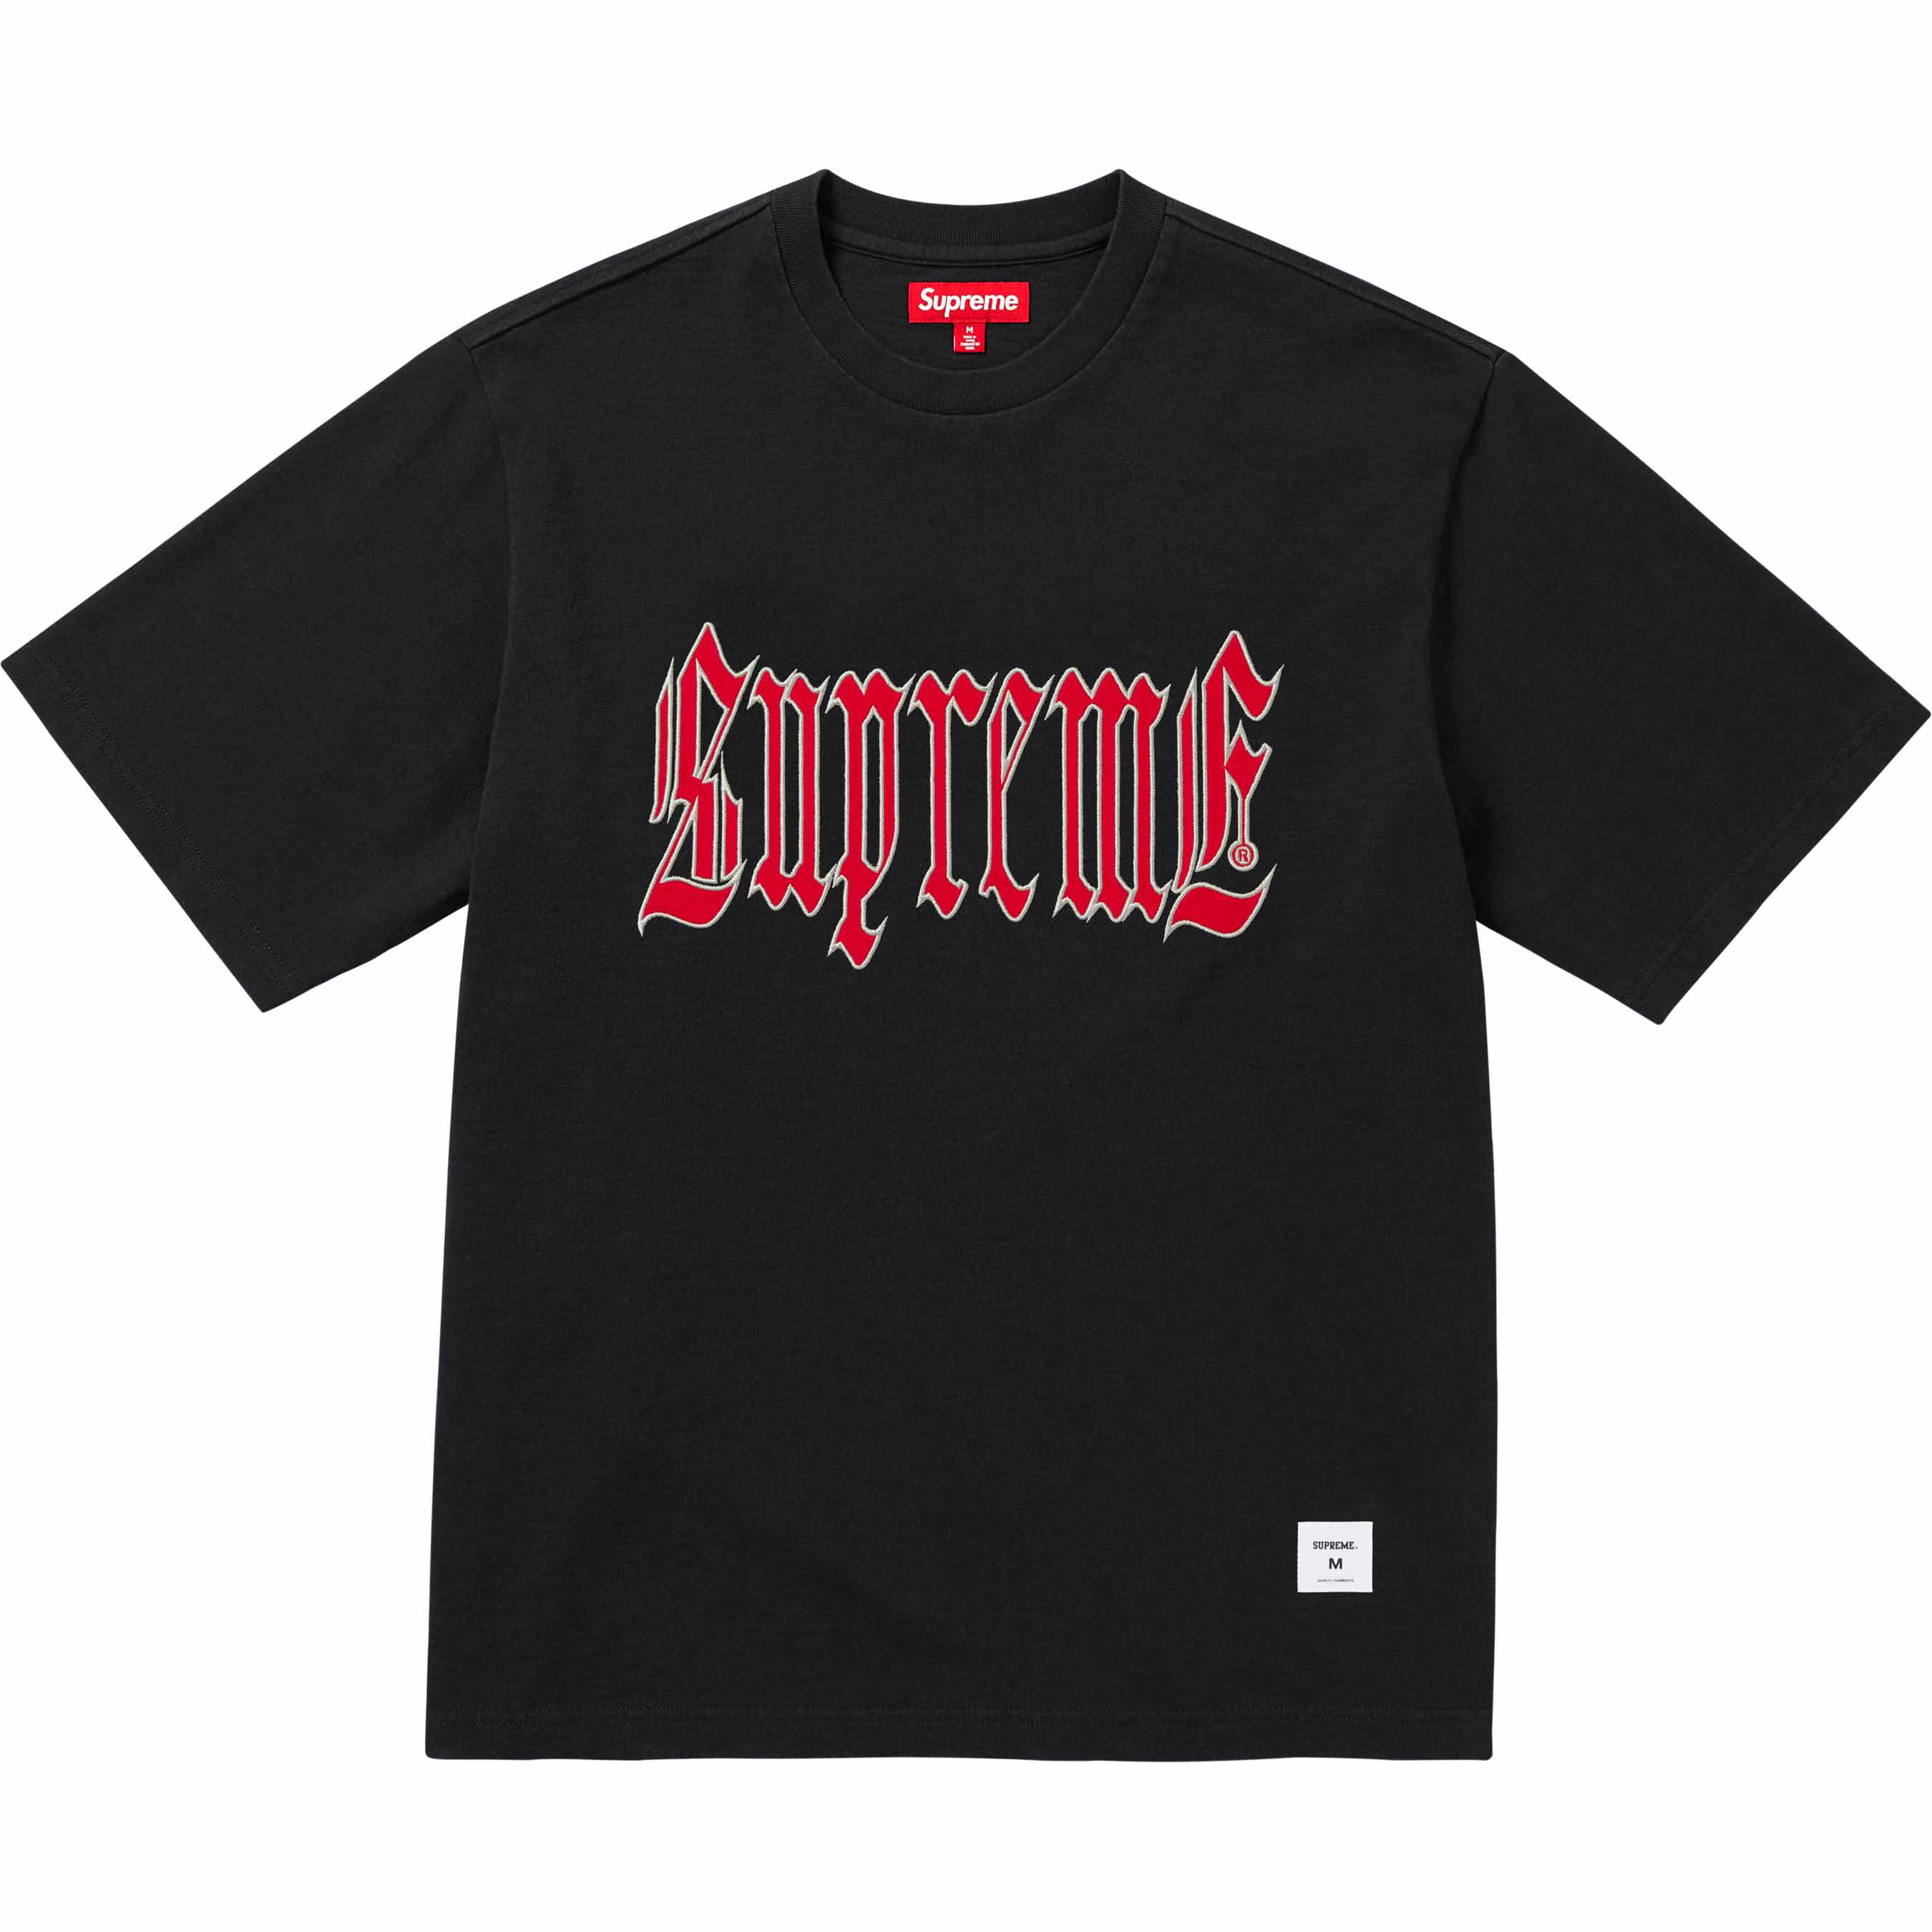 Supreme International S/S TOP Tシャツ 19AW - Tシャツ/カットソー ...